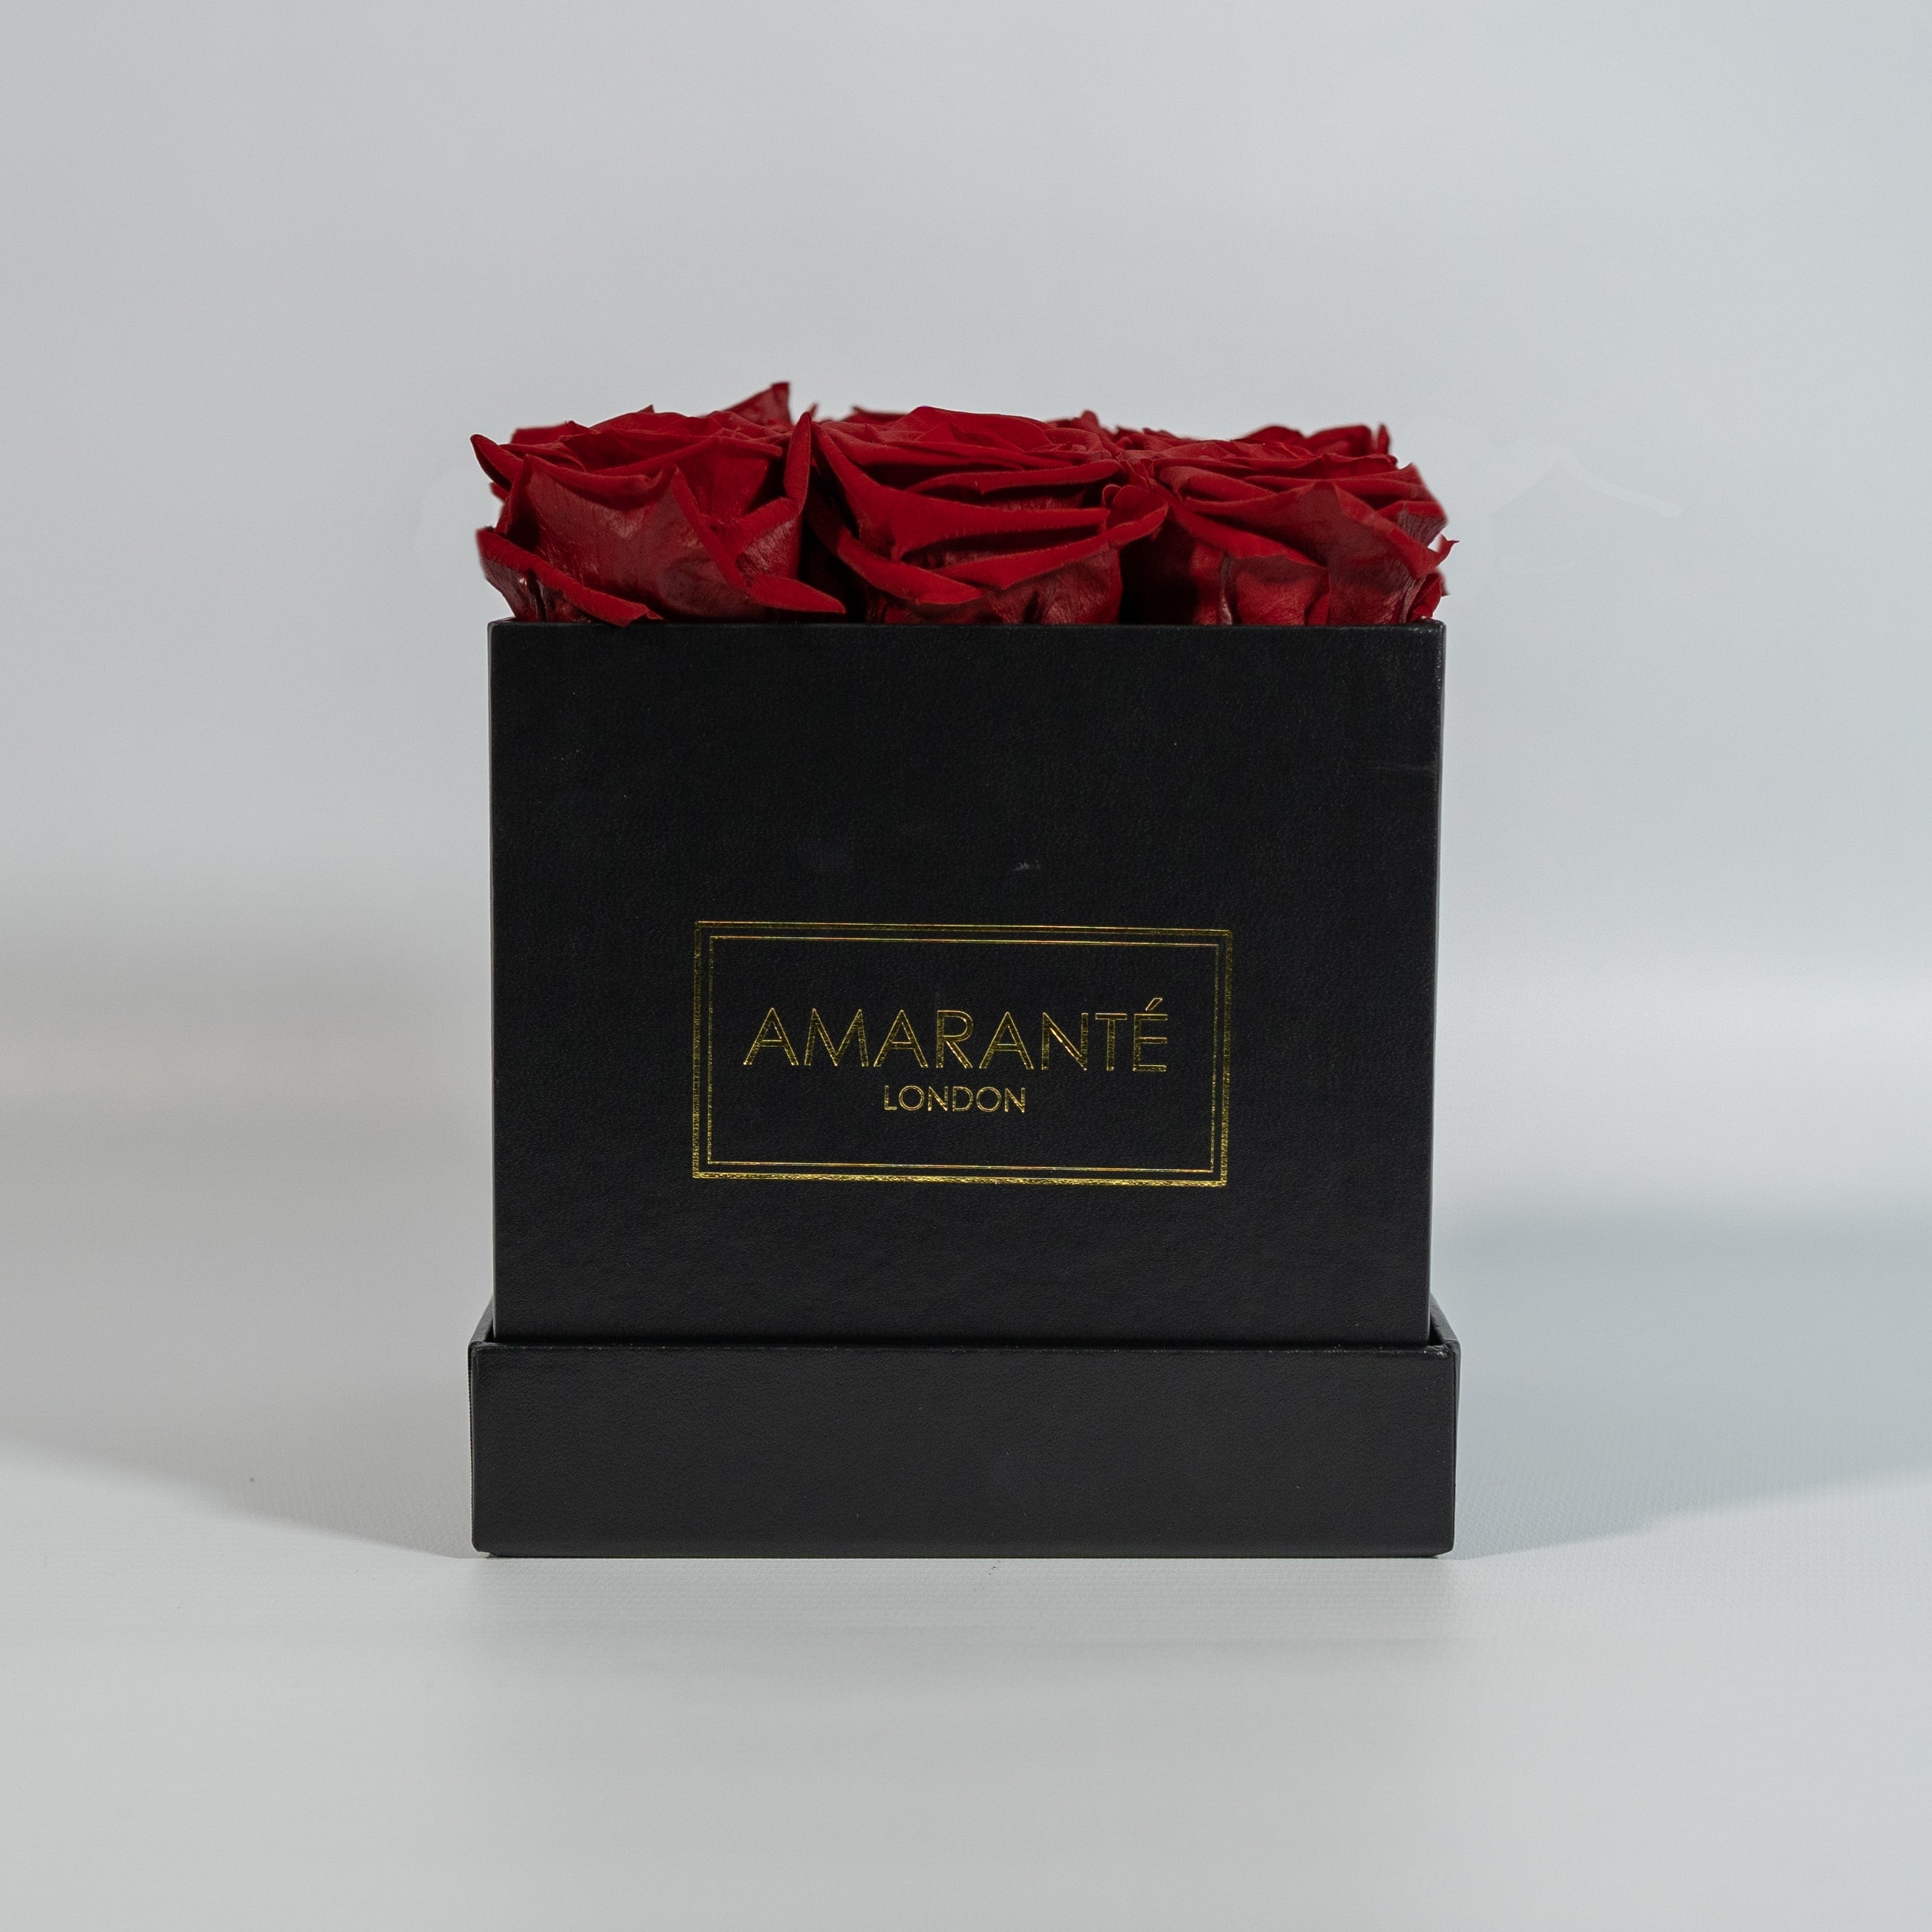 Botanical wine red roses, ideal for strong expression of love and romance 